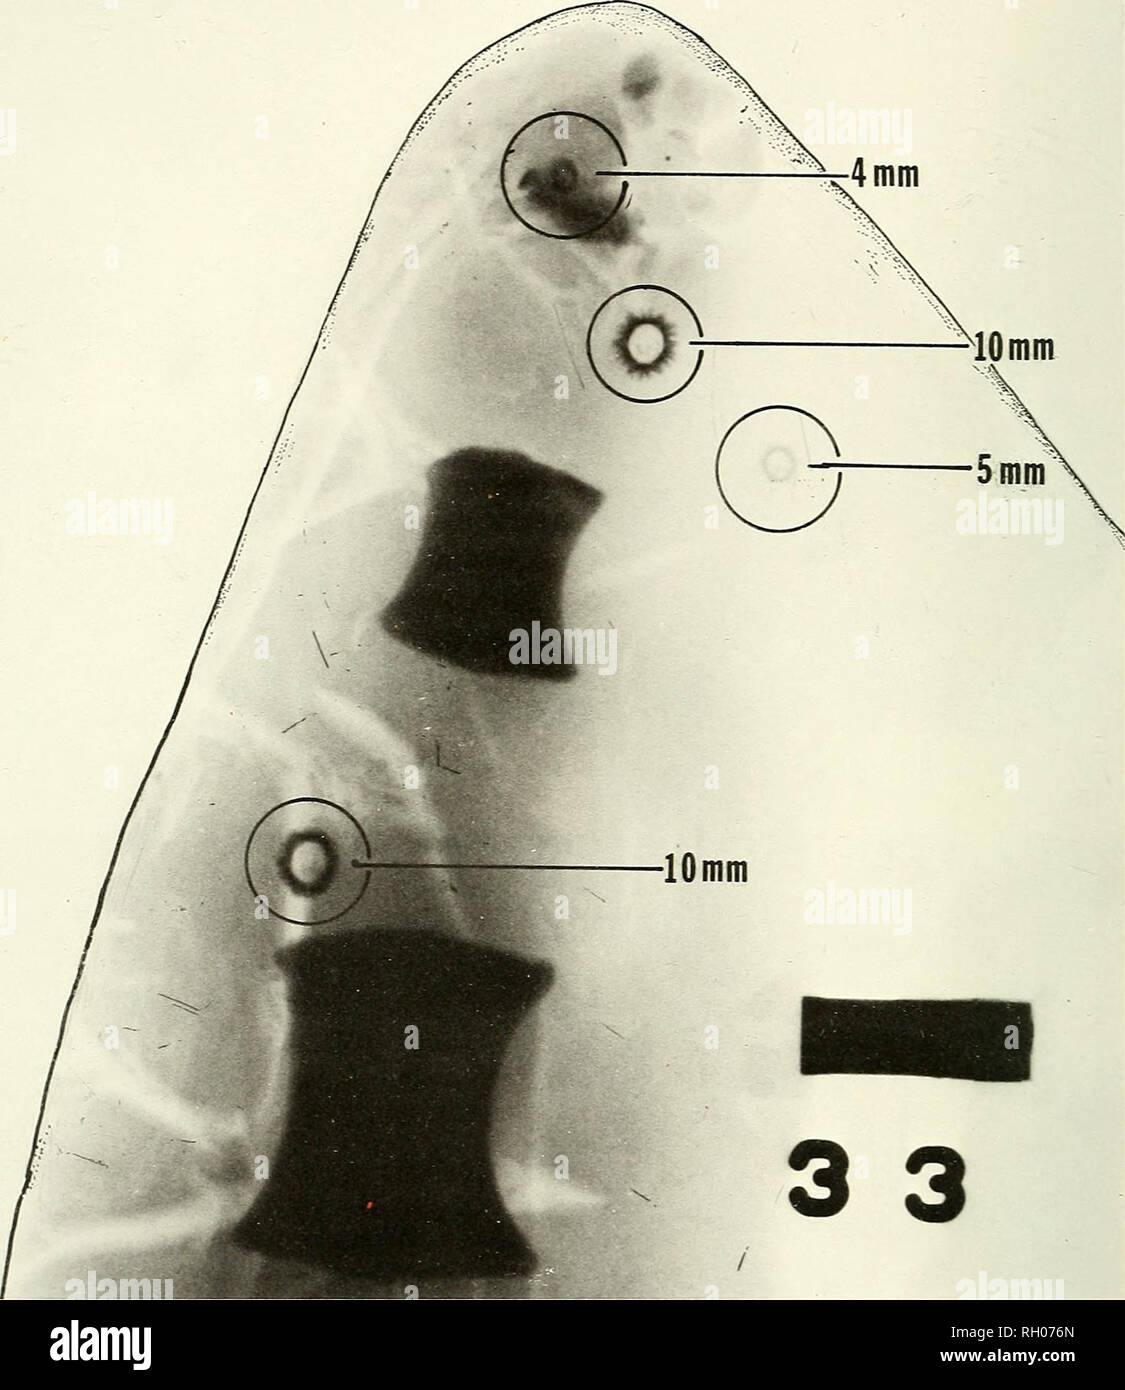 . Bulletin. Science; Natural history; Natural history. 122 SOUTHERN CALIFORNIA ACADEMY OF SCIENCES. Fig. 8. X-ray of four seed barnacles on the distal tip of the right pectoral fin of a yearling, male gray whale (Table 1, LACM-54549). attachment occurs. Initial attachment of the cypris larva of Cryptolepas rhachi- anecti has not yet been observed. Evidence based on the development and growth pattern of C rhachianecti, along with the analysis of specimens by means of cross- sections and x-rays (Figs. 5a, b, and 9) of &quot;seed&quot; barnacle-rich gray whale skin, show that juvenile barnacles ( Stock Photo